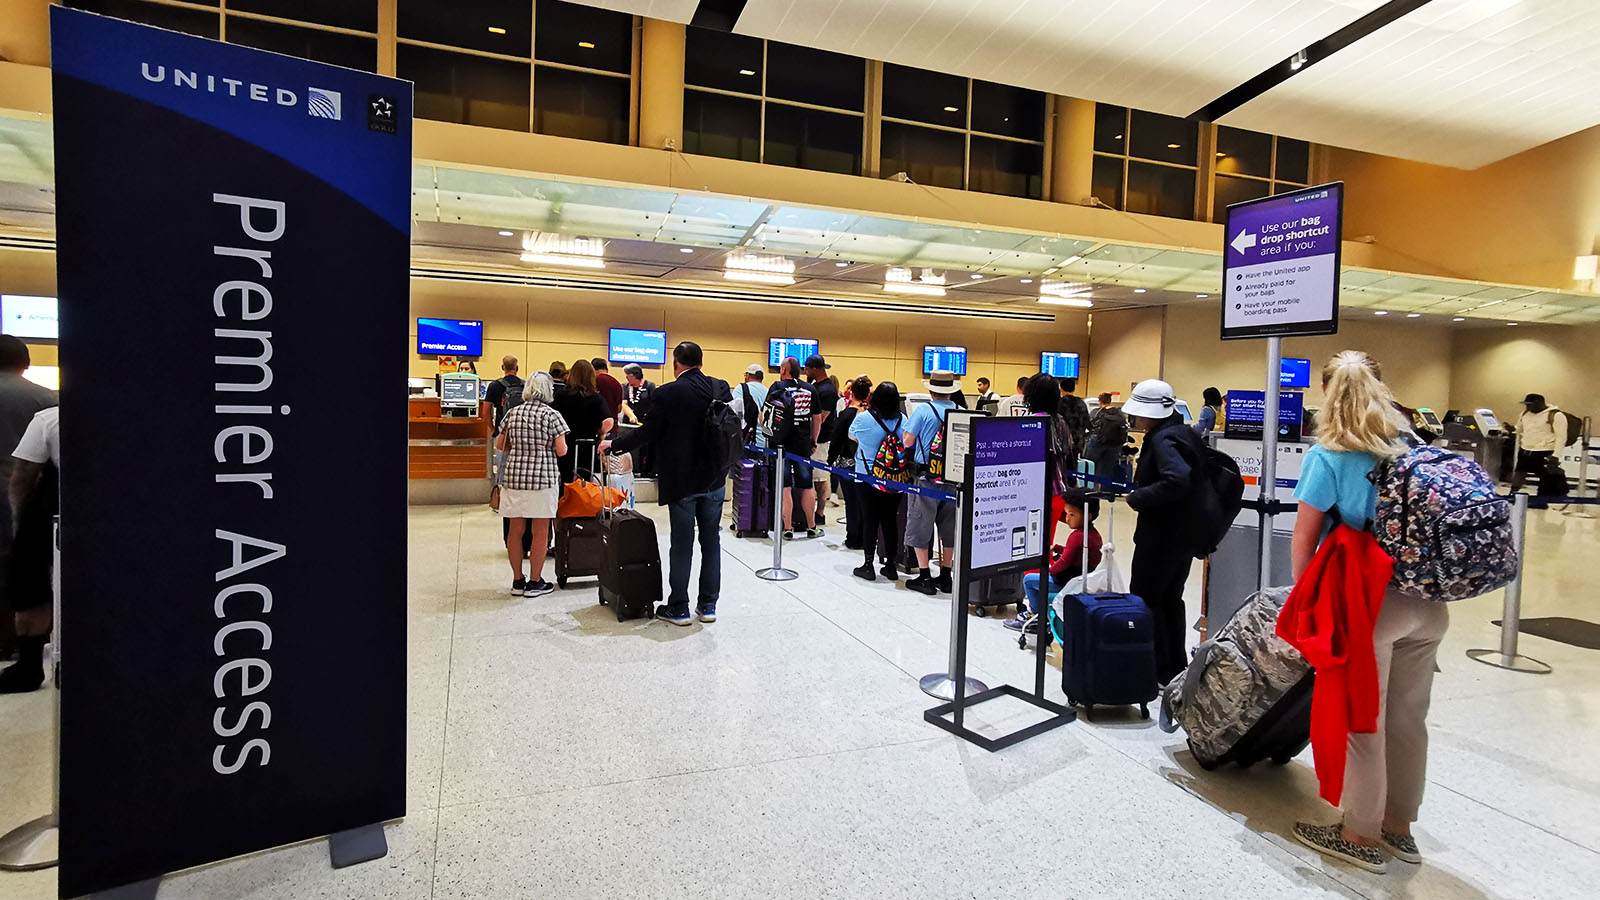 Priority check-in at San Antonio Airport with United Airlines